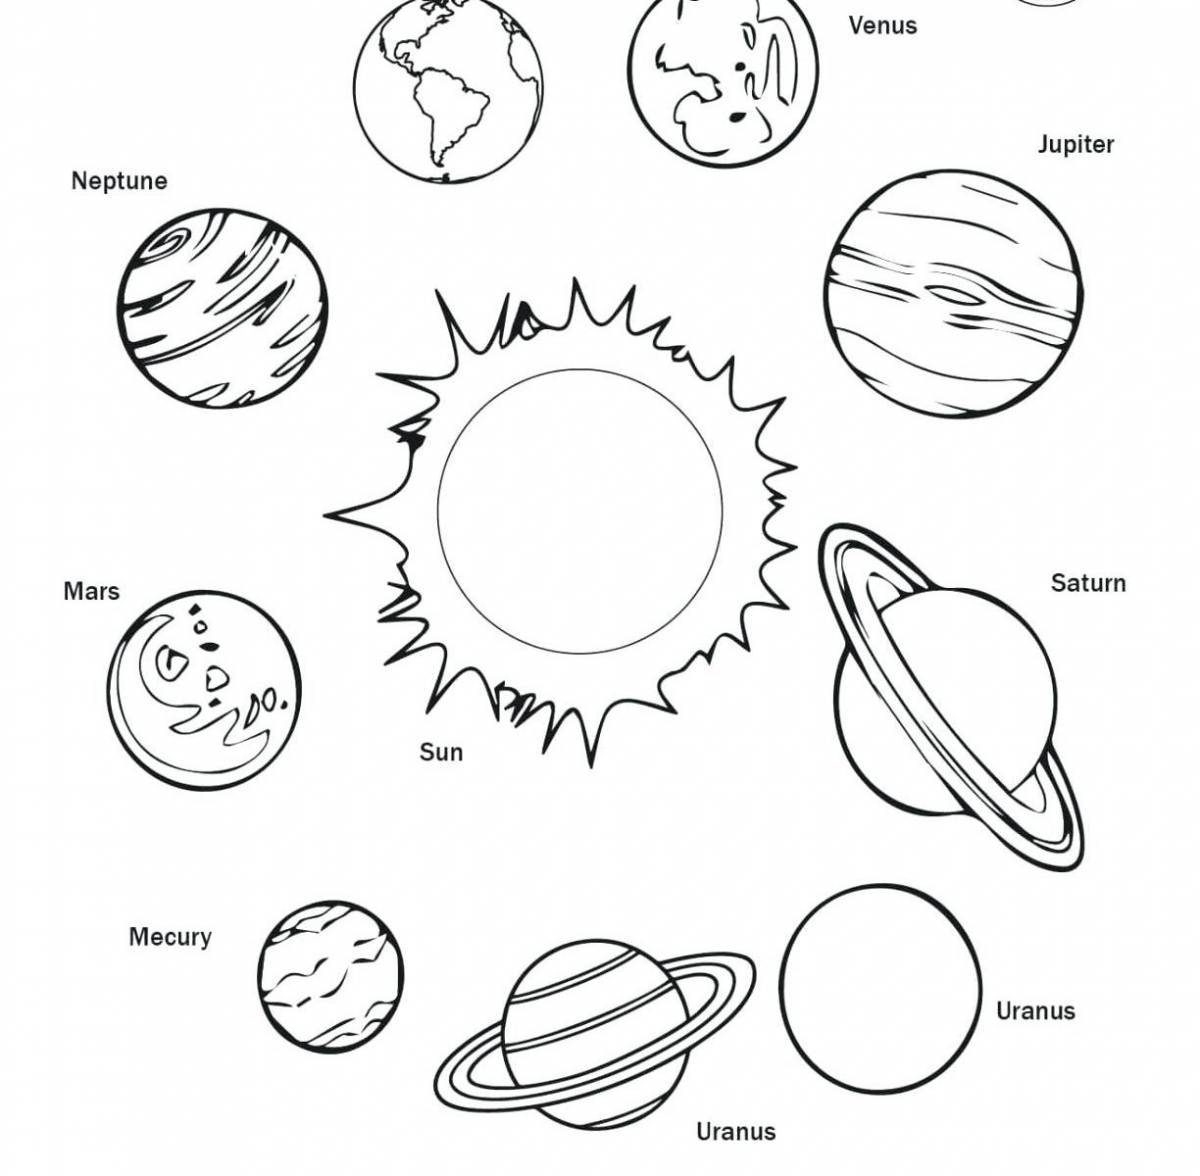 Planets of the solar system #7